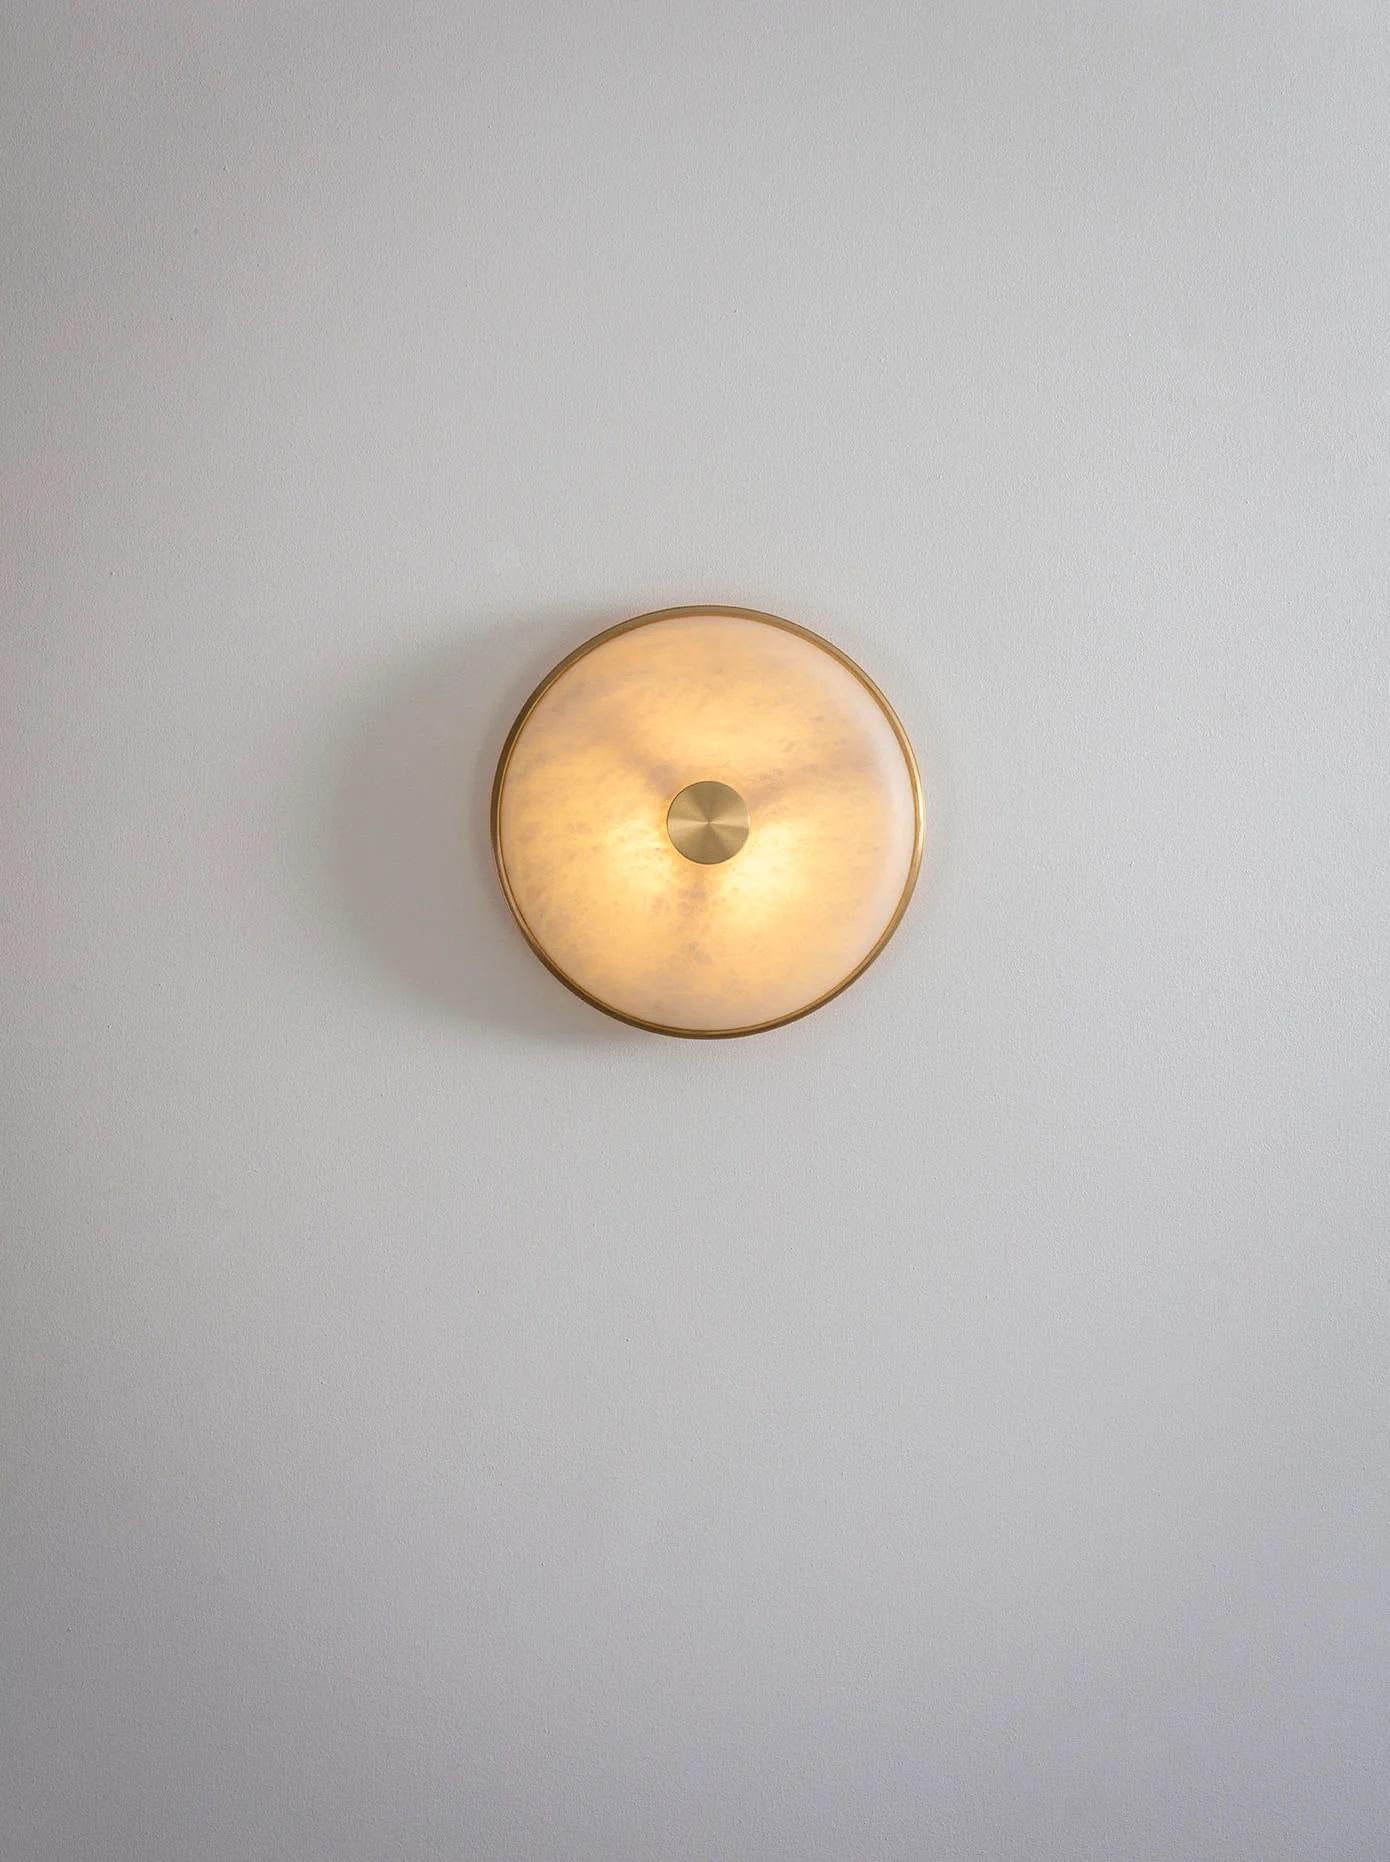 Beran Brushed Brass Small Wall Light by Bert Frank
Dimensions: D 6,5 x W 26 x H 26 cm.
Materials: Brass and alabaster.

Available in two different sizes. Available in different finishes and materials. Please contact us. 

Simple and elegant in form,